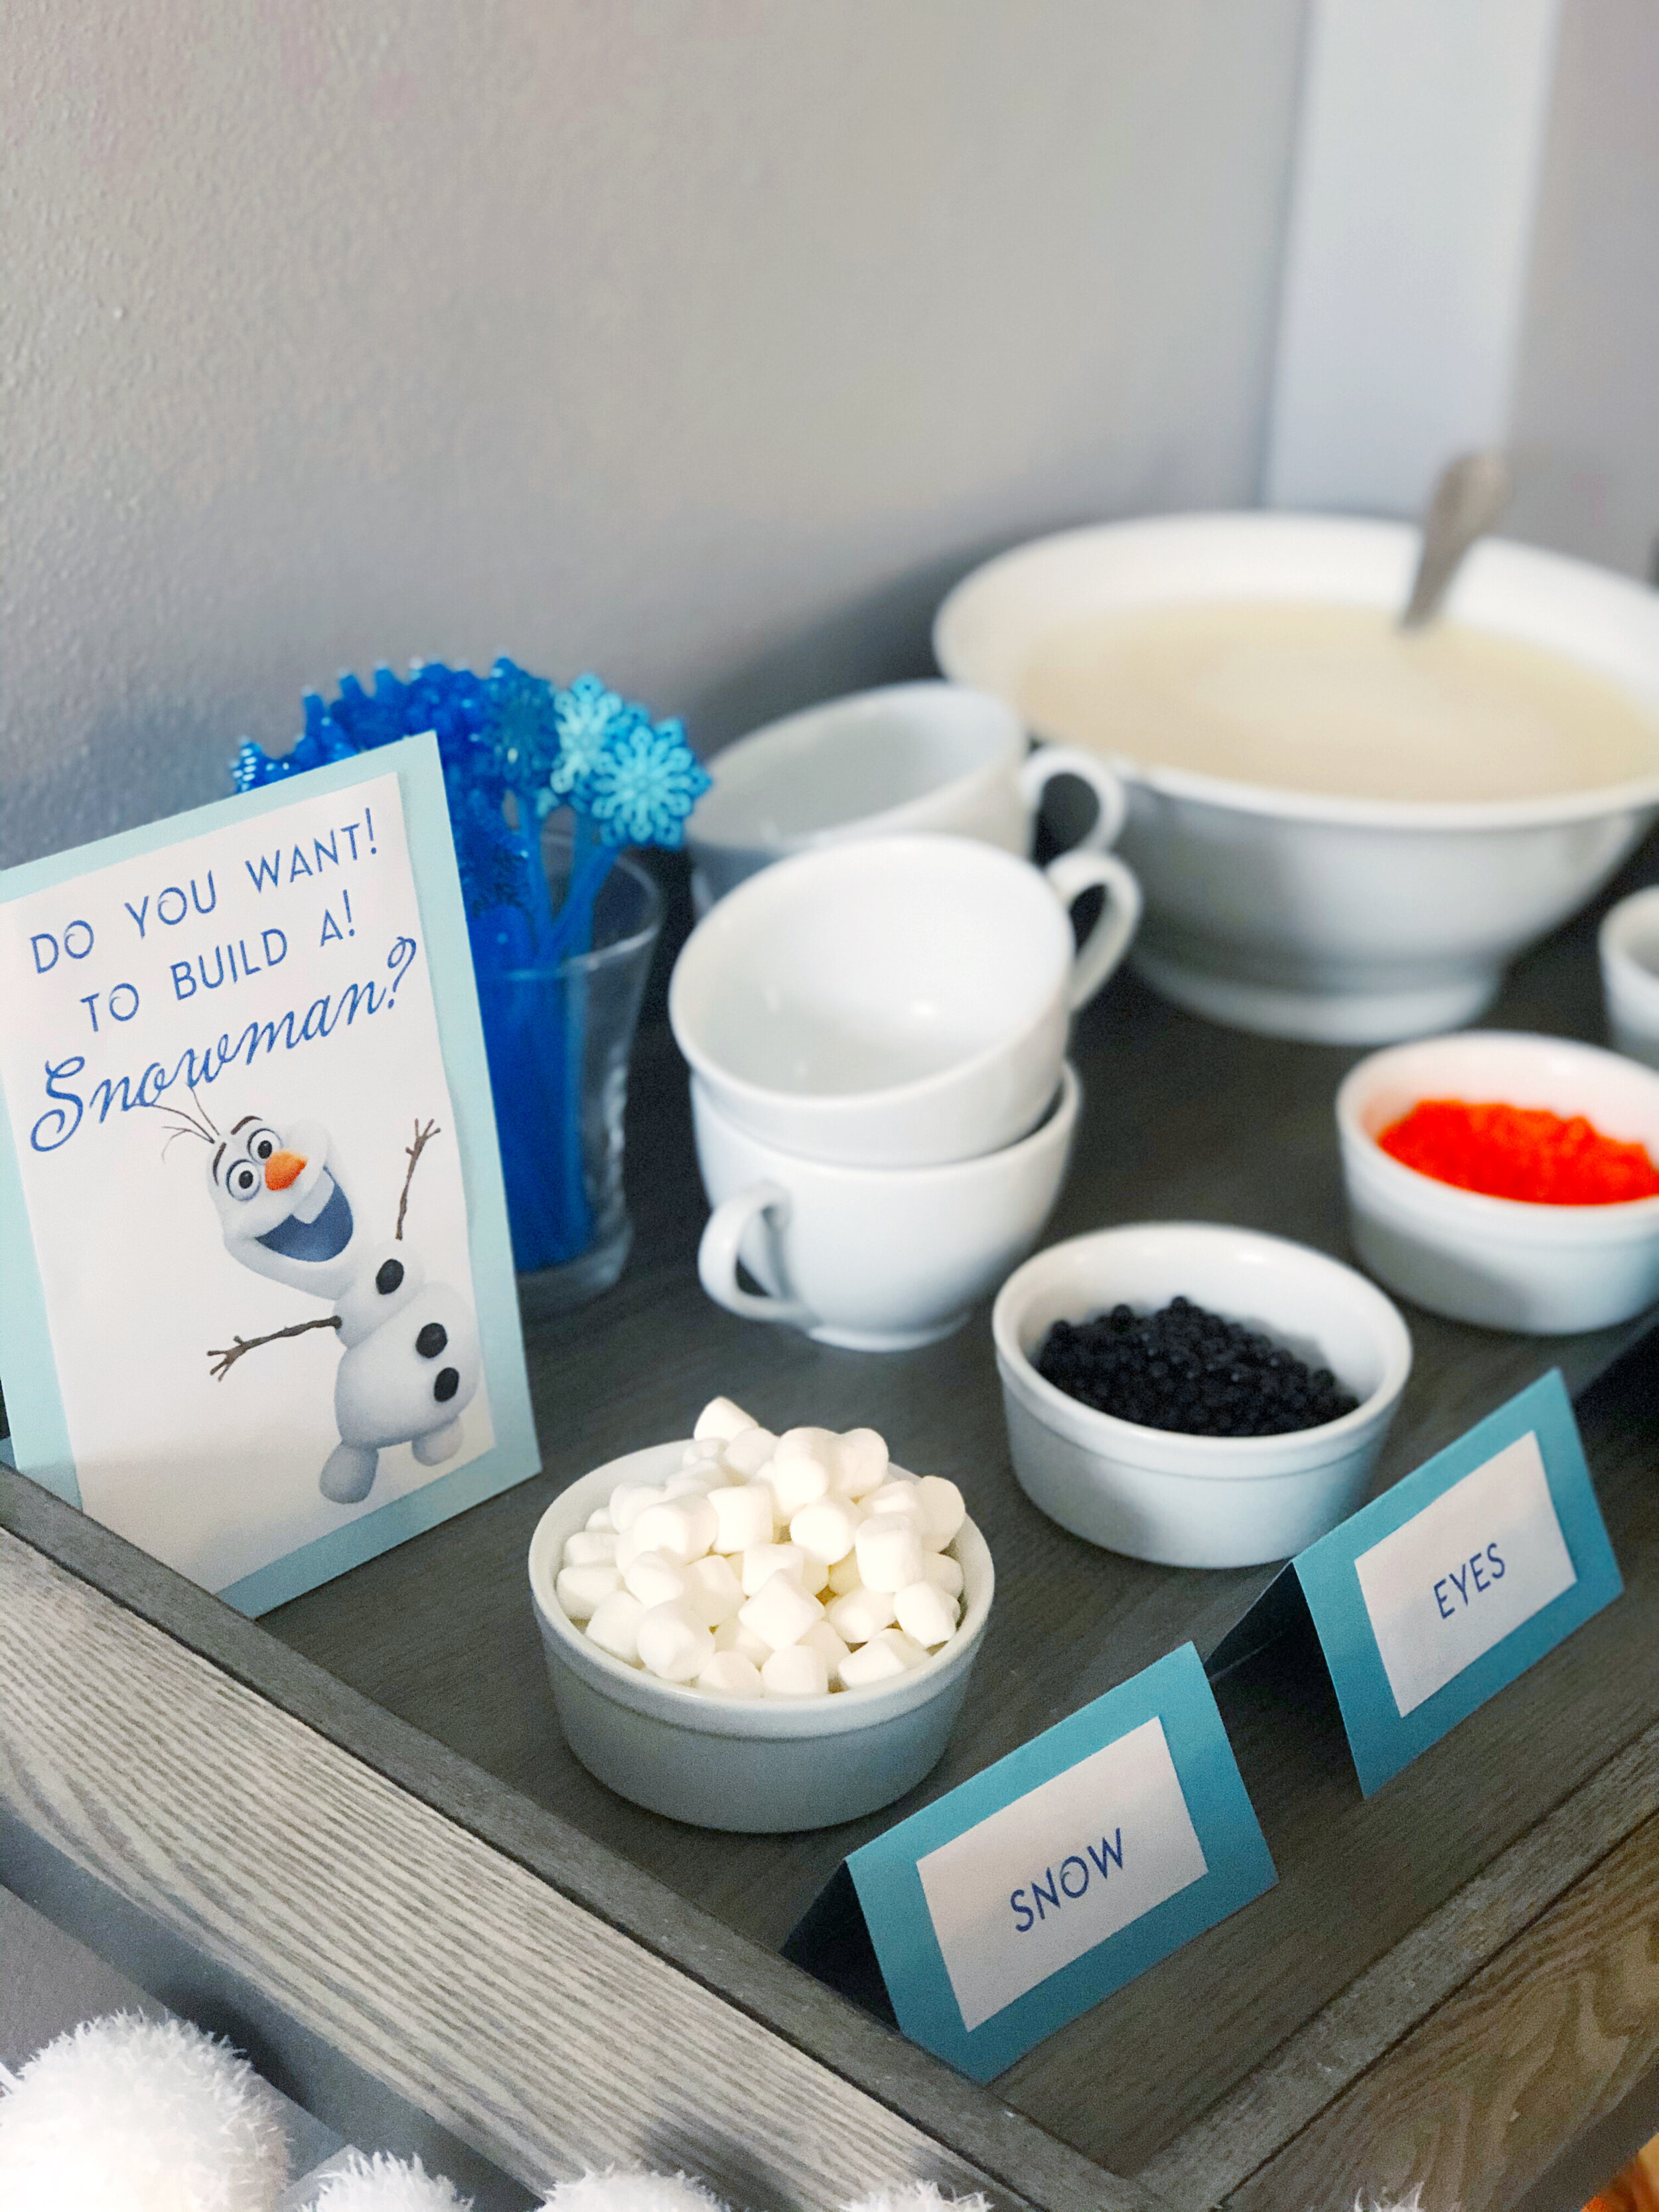 Frozen Themed Waffle Birthday Party with FREE PRINTABLES  Frozen theme  party, Frozen themed birthday party, Frozen birthday party